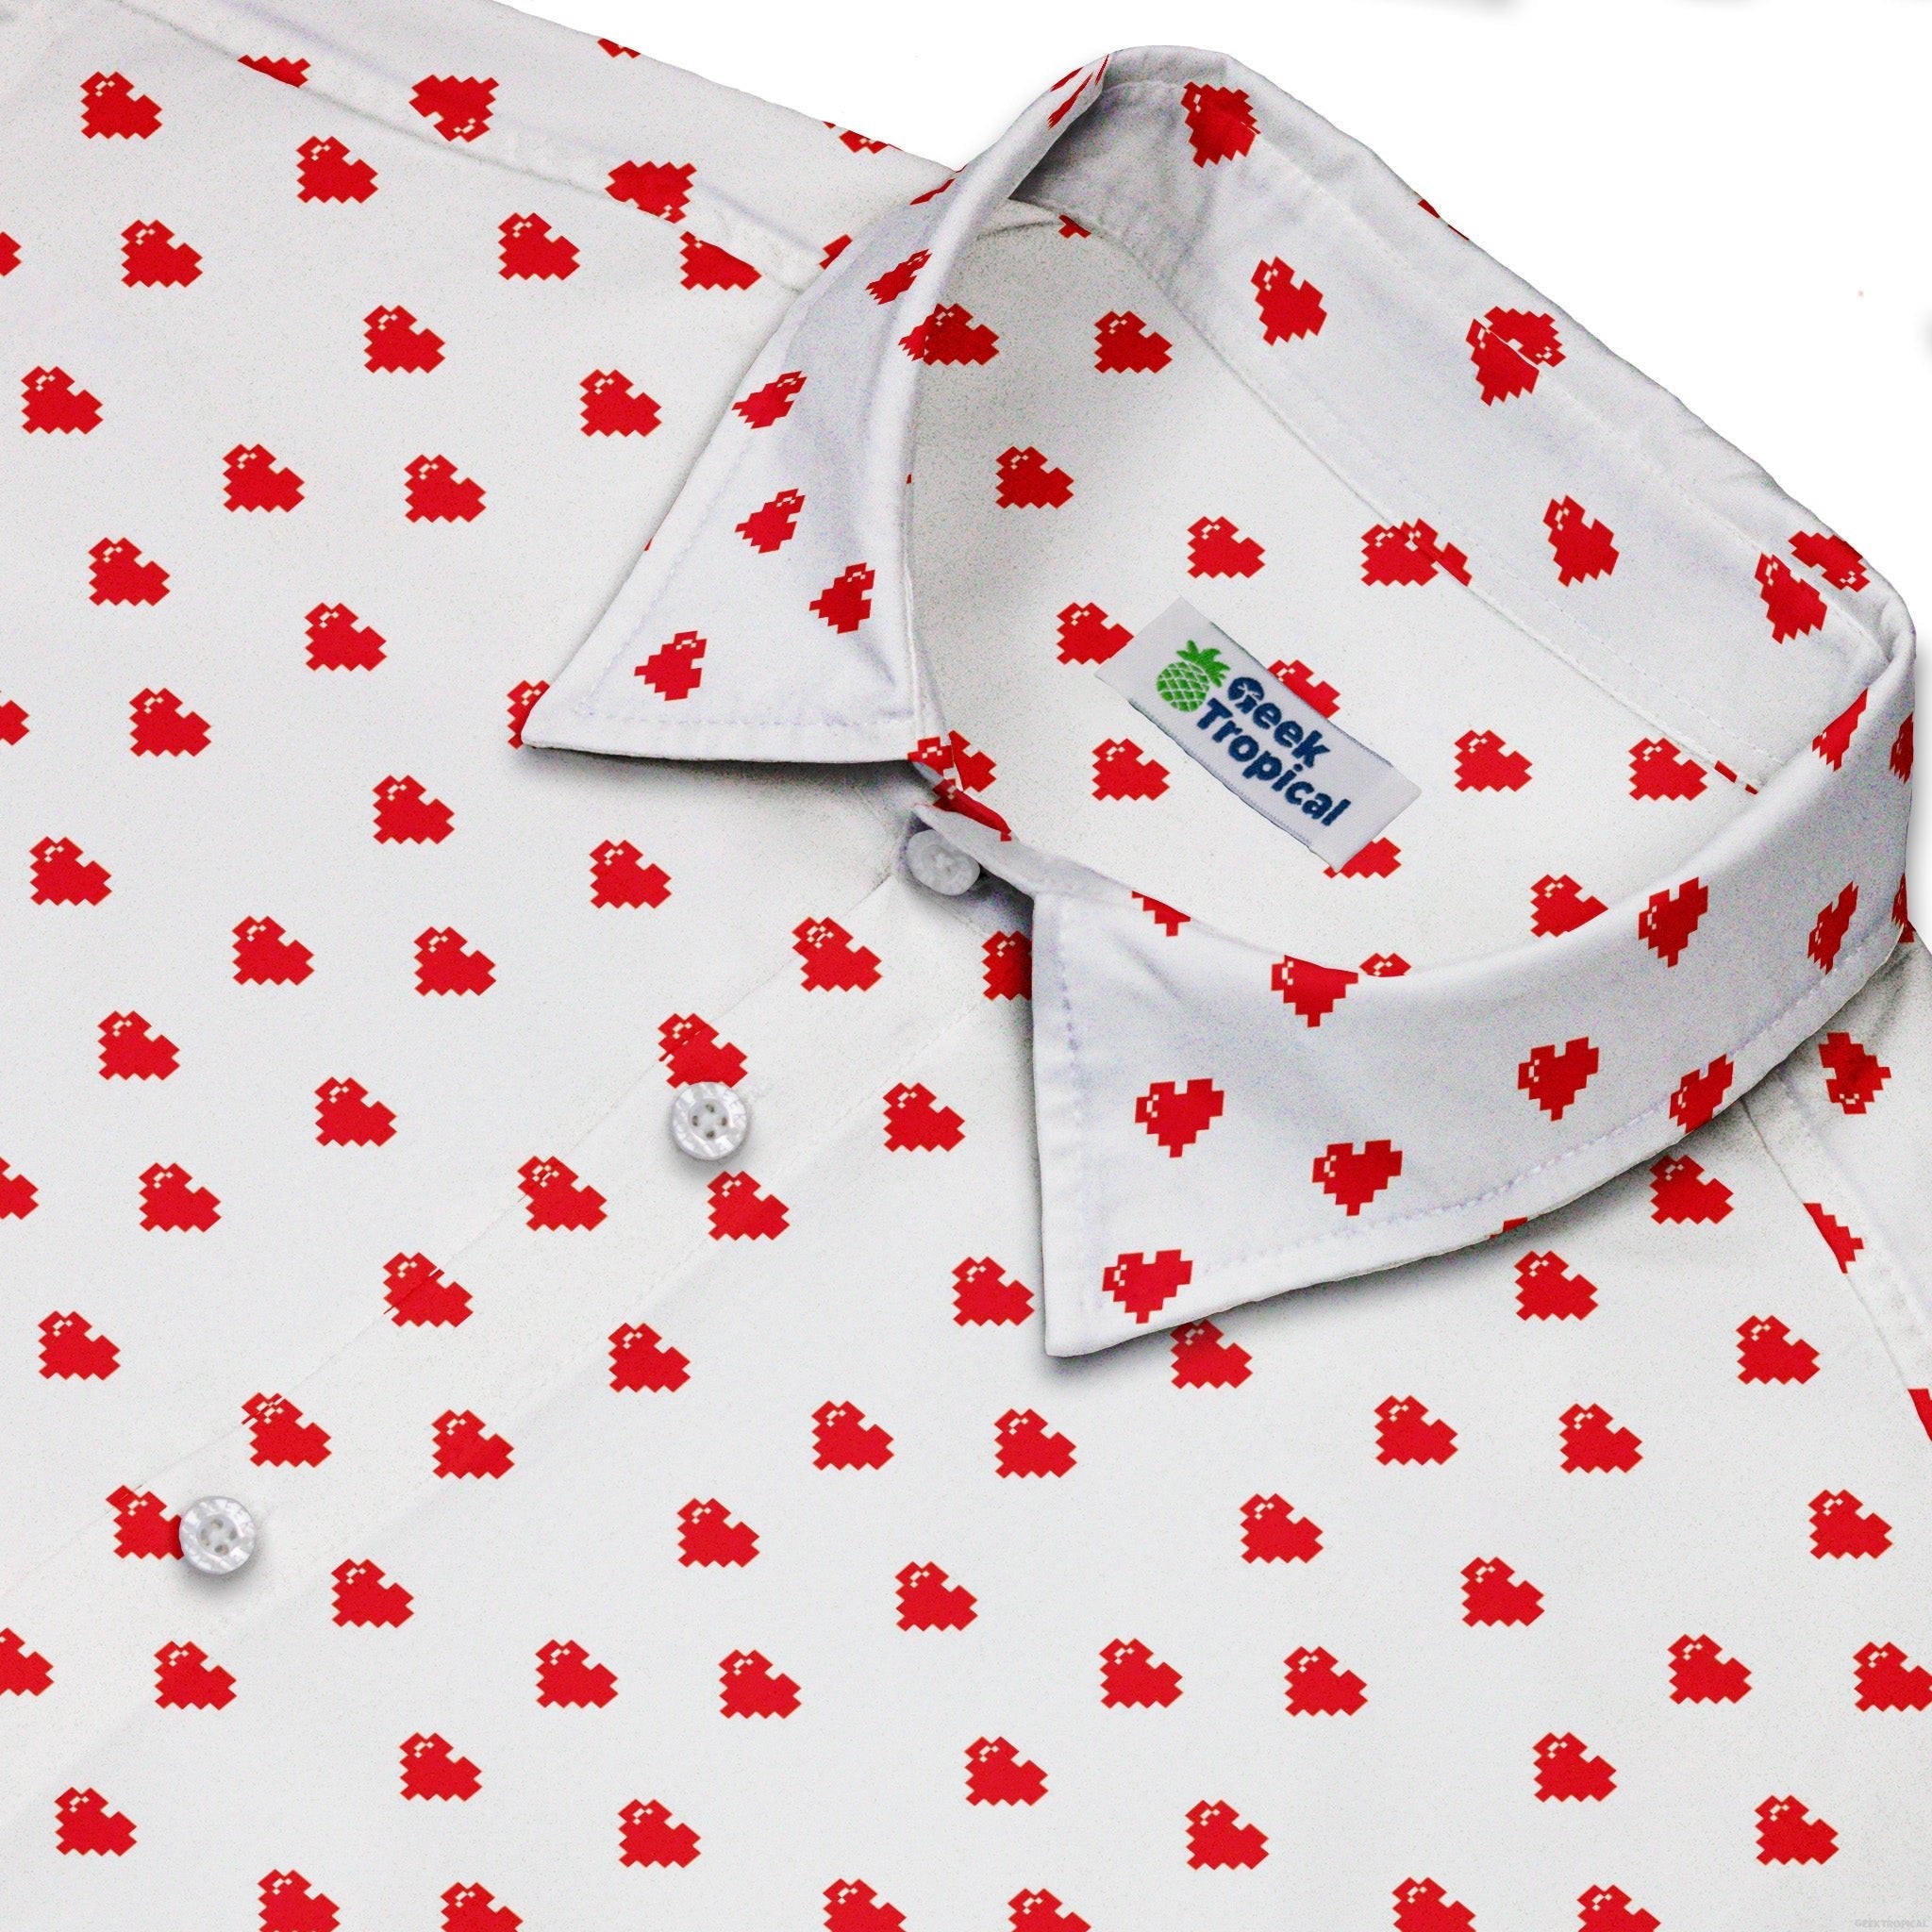 Video Game Heart White Button Up Shirt - adult sizing - Design by Heather Davenport - Simple Patterns